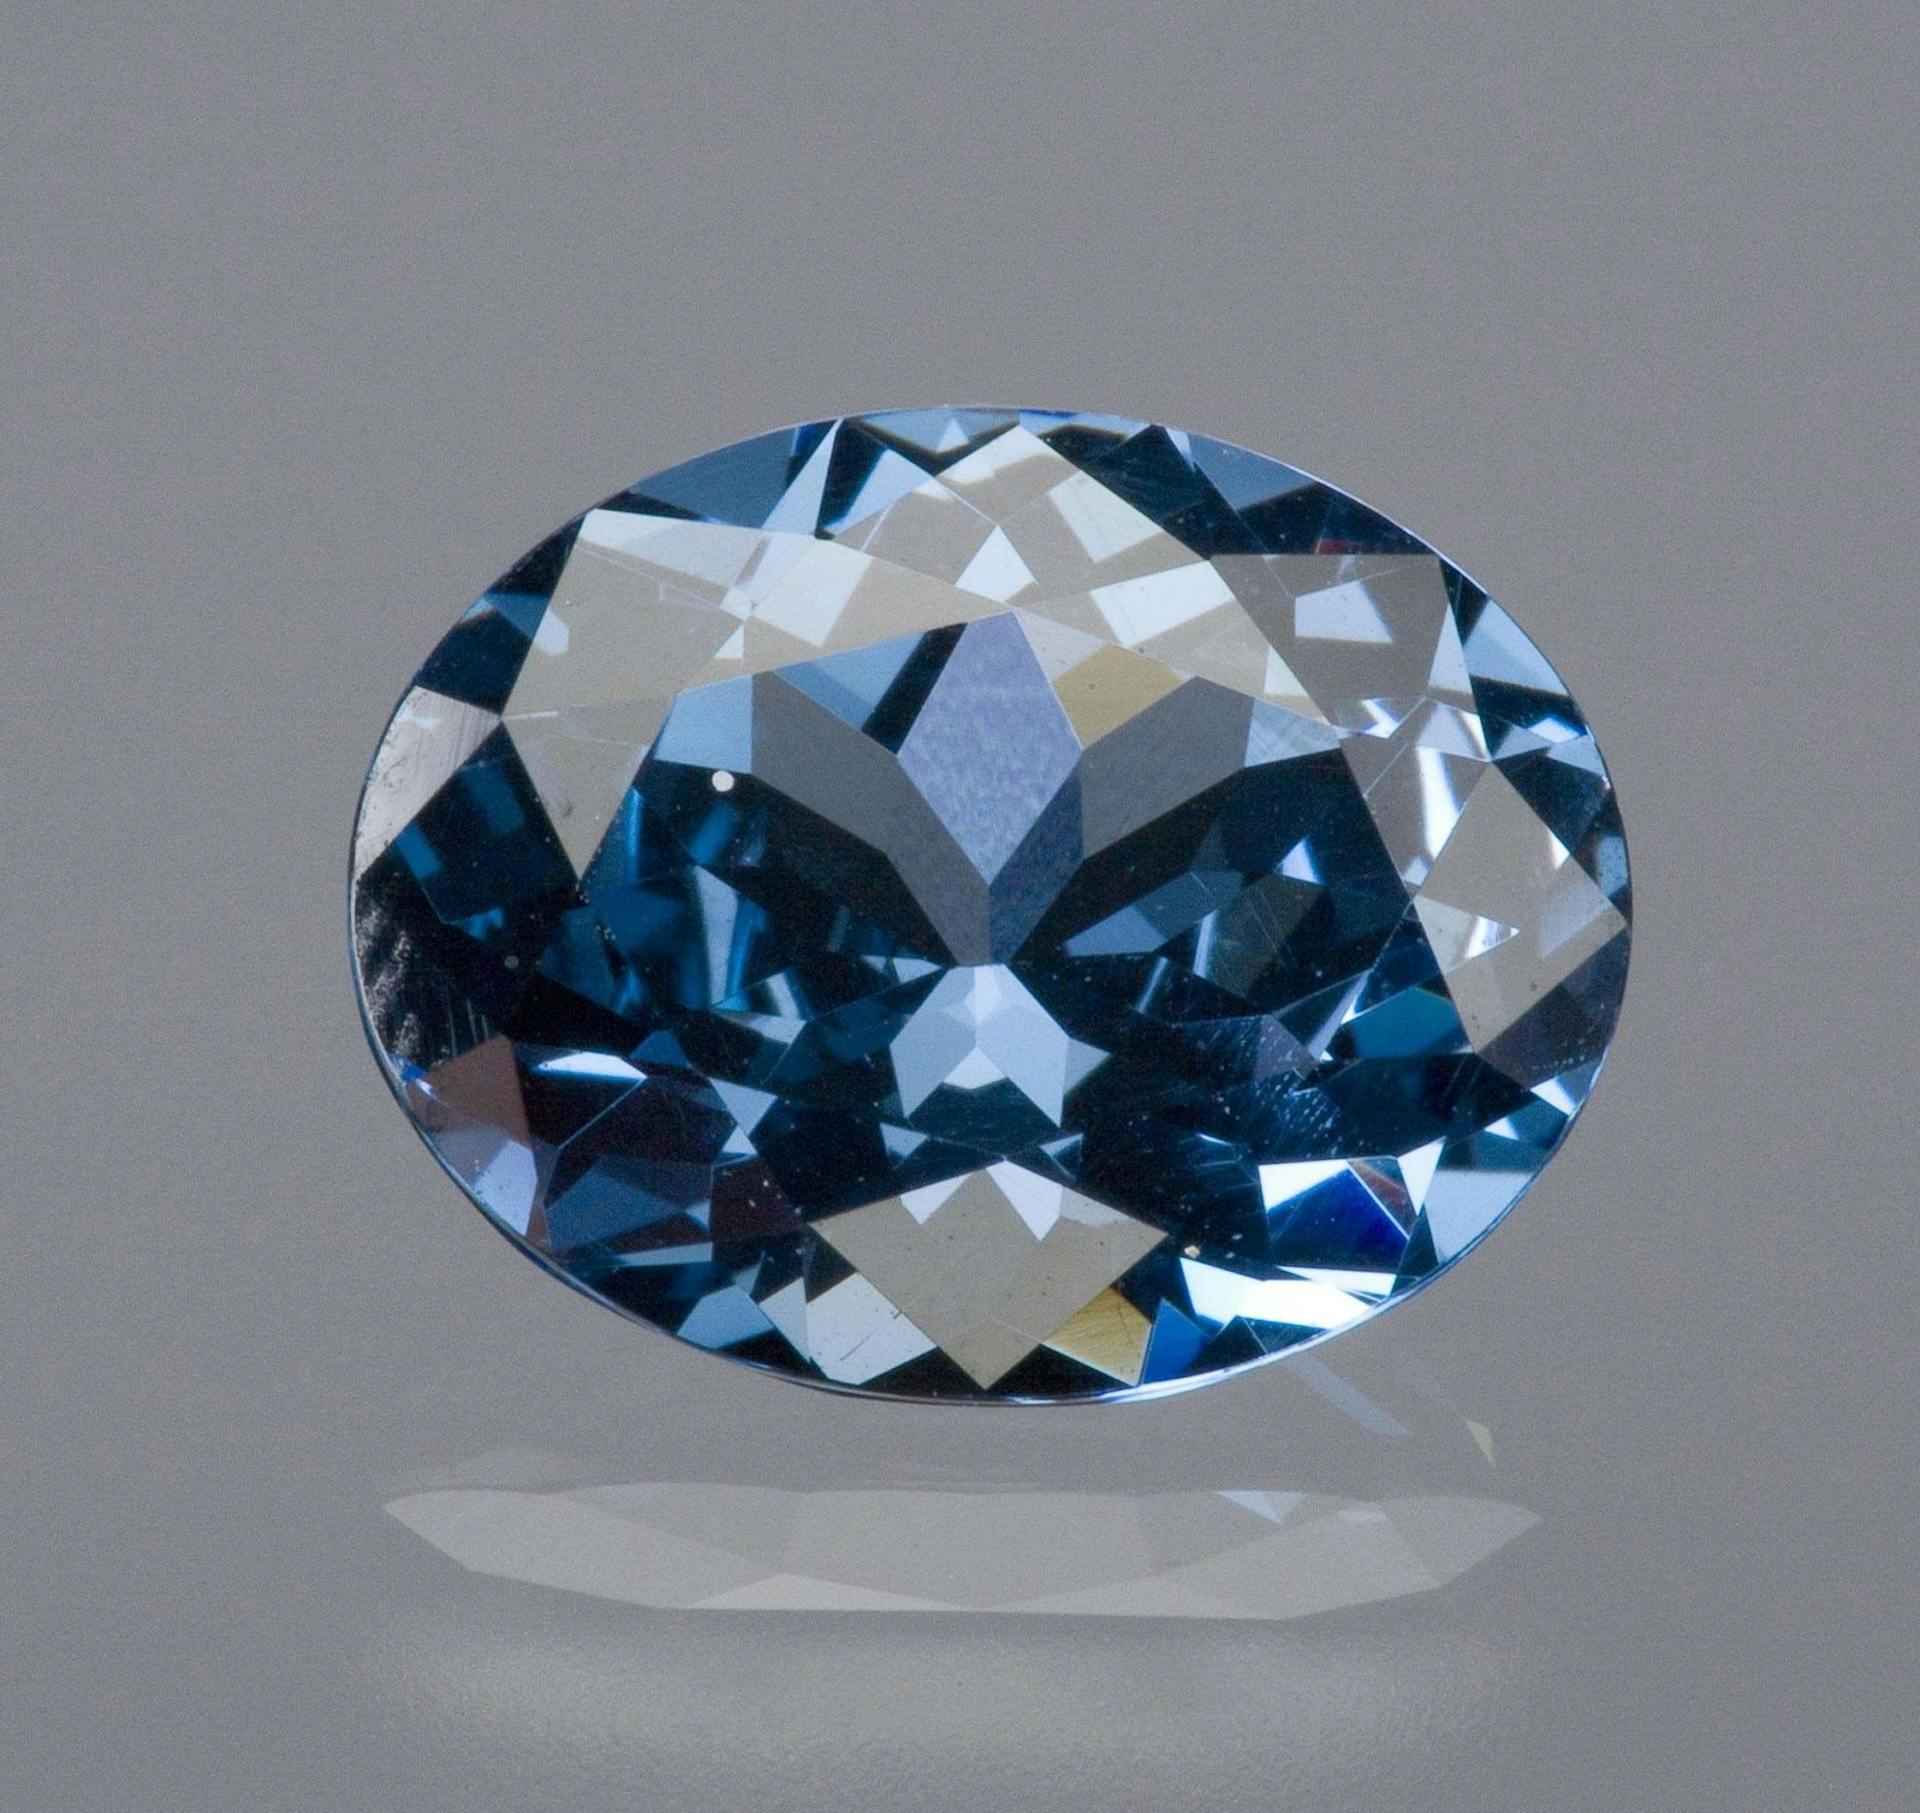 Blue Spinel, Vietnam, 5.58 cts - Spinel Buying Guide